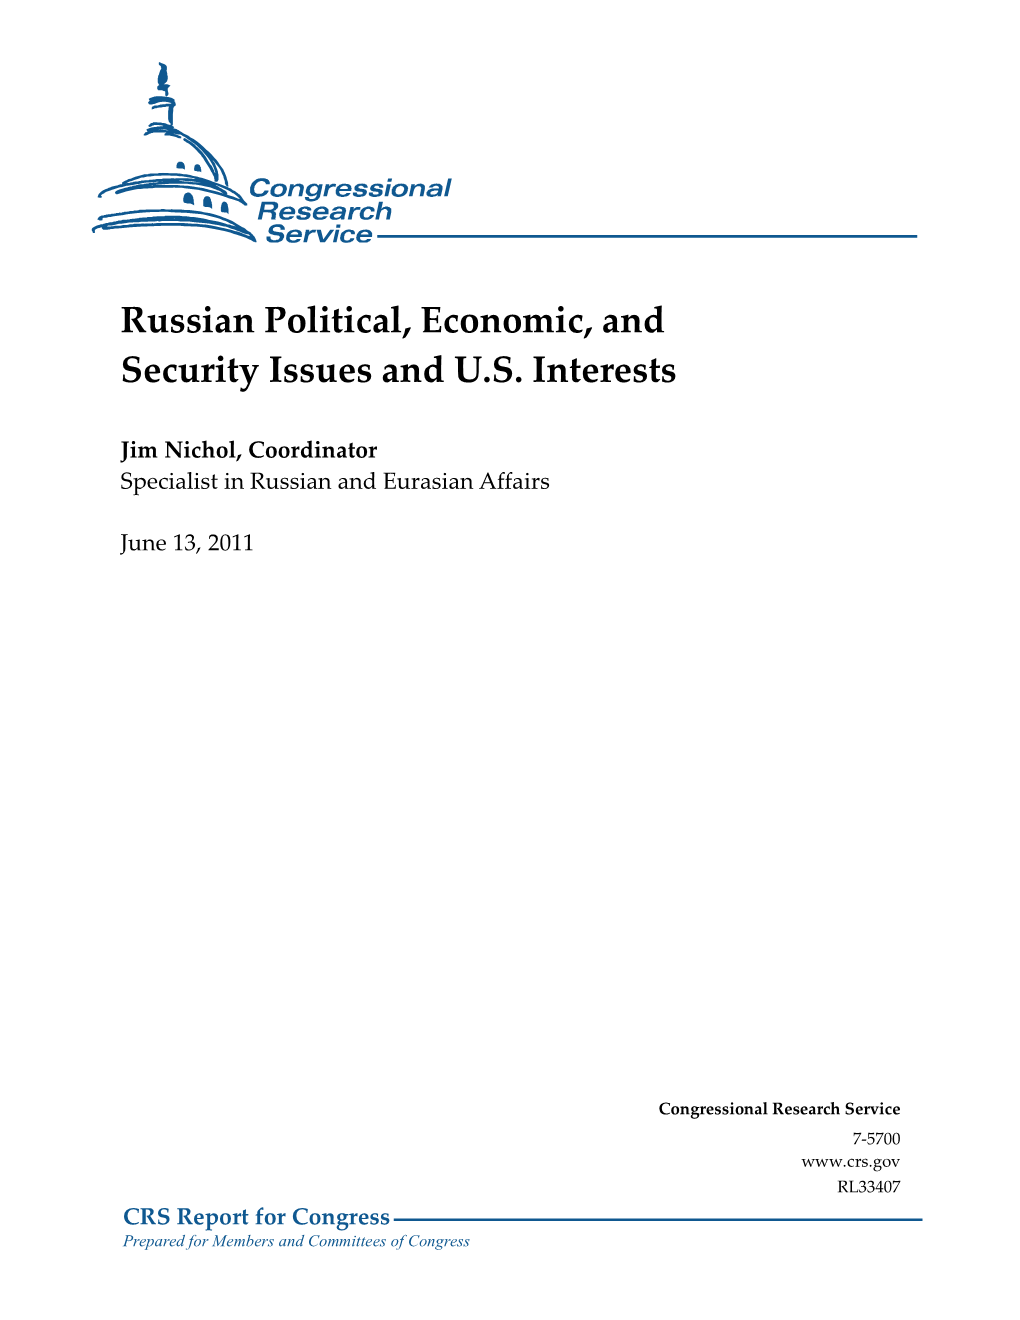 Russian Political, Economic, and Security Issues and U.S. Interests